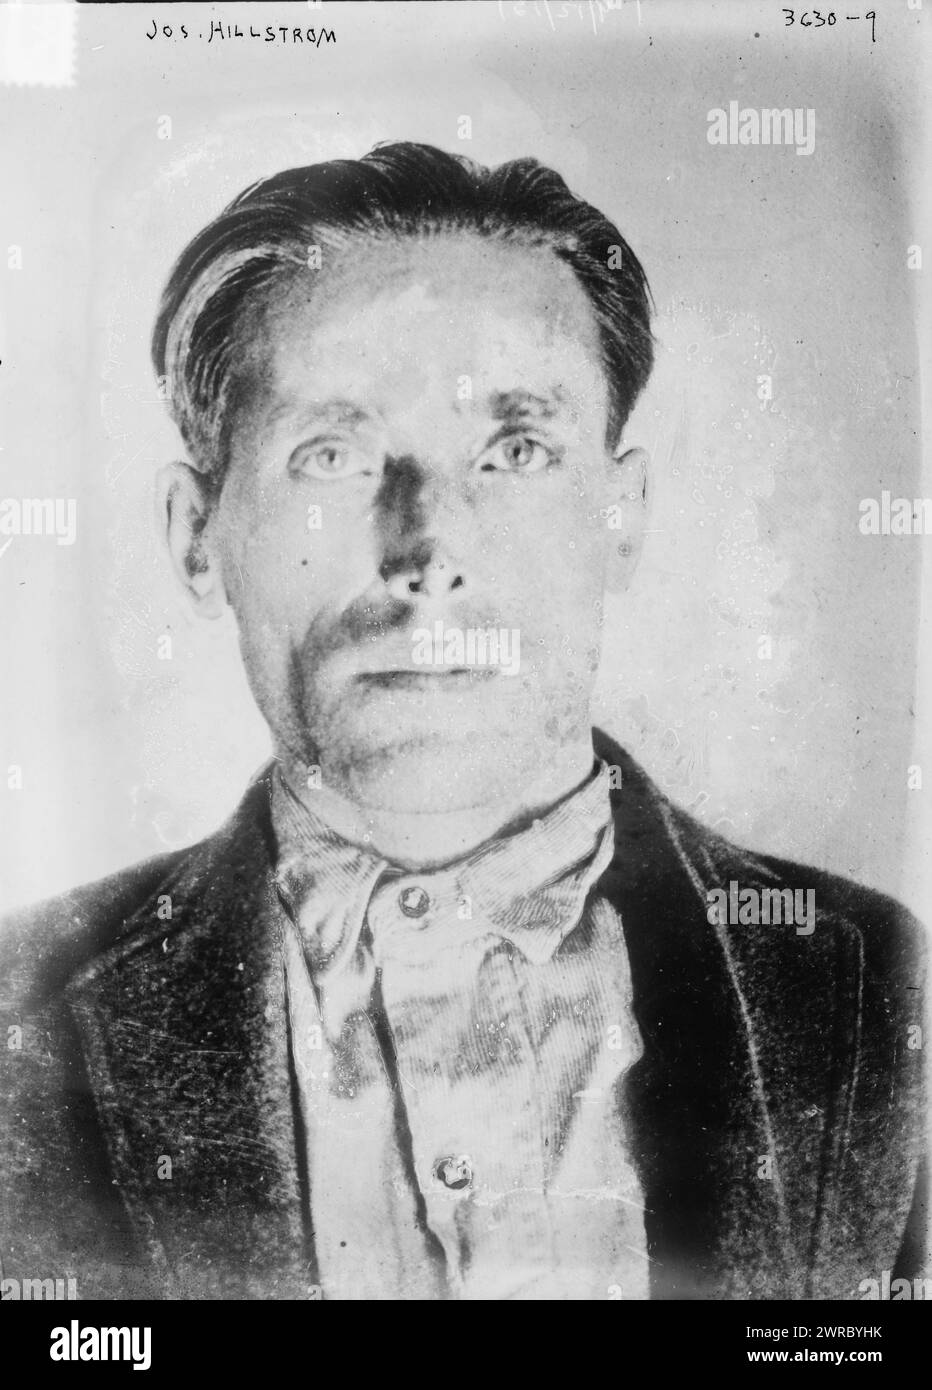 Jos. Hillstrom, Photograph shows Joe Hill (1879-1915), born Joel Emmanuel Hägglund and also known as Joseph Hillström, a Swedish-American labor activist who was accused of murder and executed in 1915., 1915 Sept. 15, Glass negatives, 1 negative: glass Stock Photo